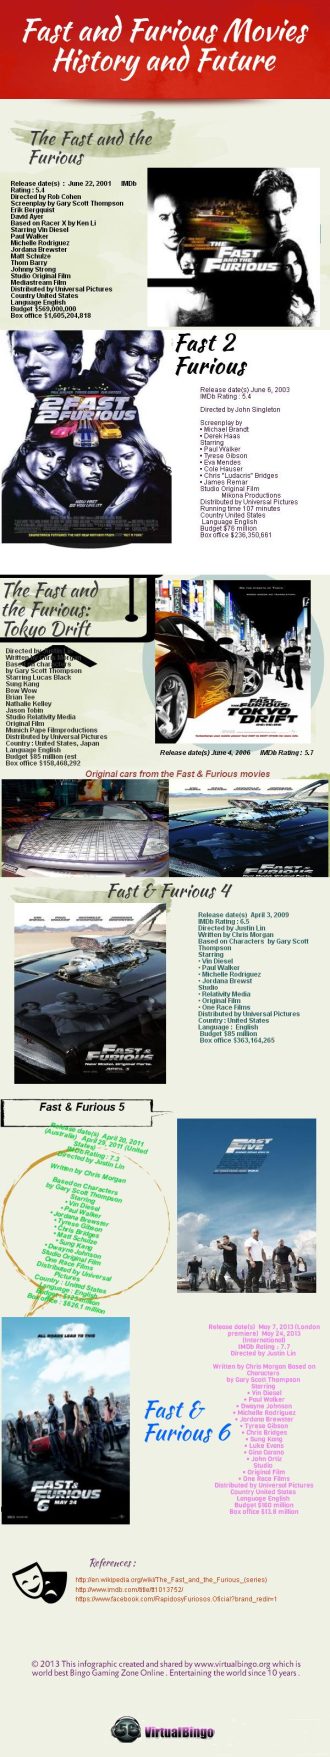 Fast and Furious Infographic